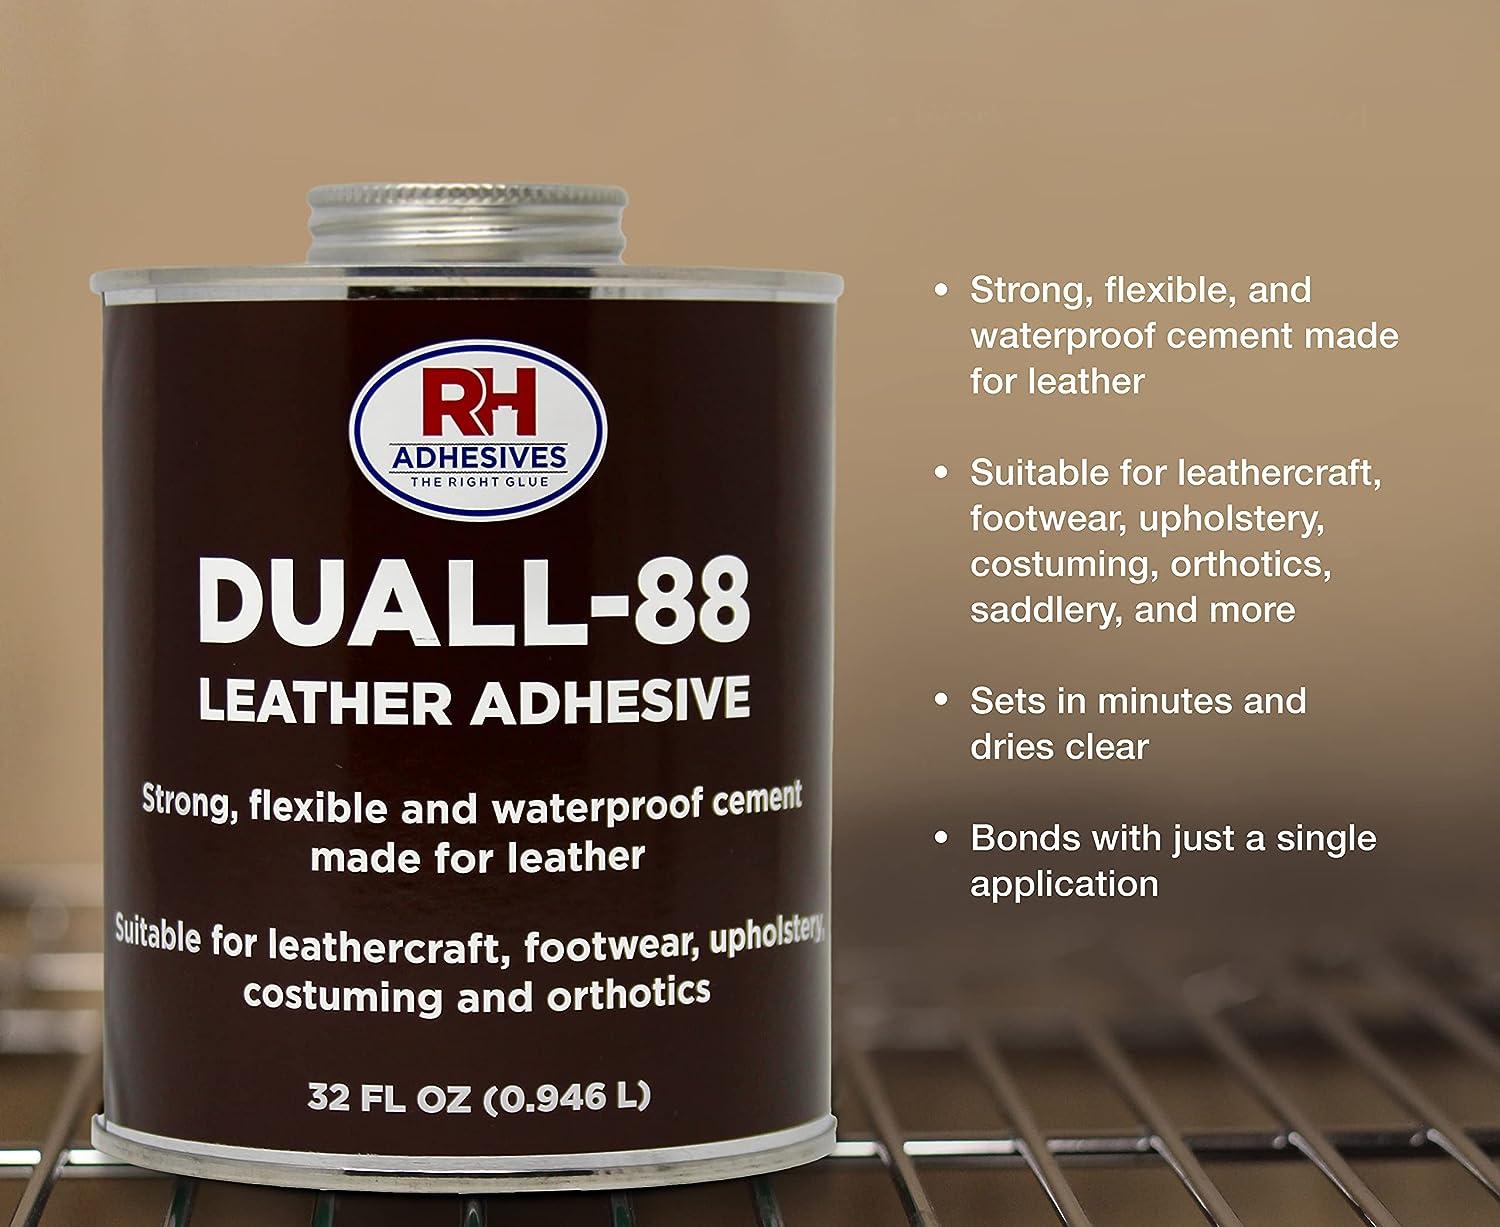 Buy Duall #88 Contact Cement - Quart Online at $34 - JL Smith & Co